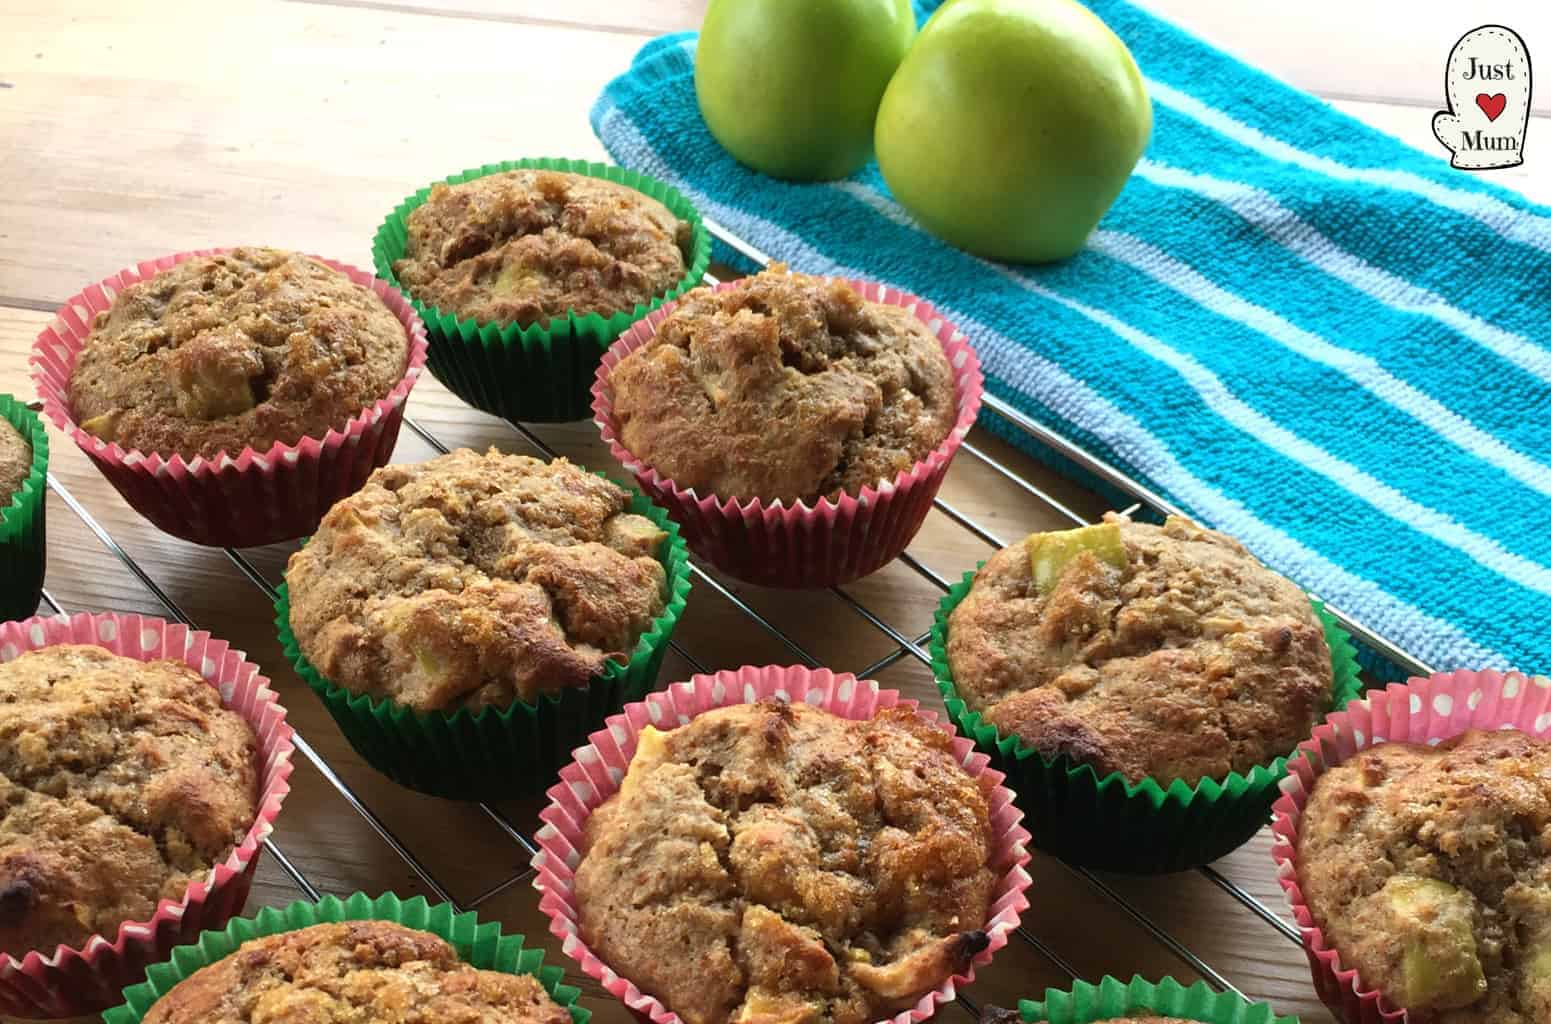 Just A Mum's Healthy Apple & Maple Syrup Muffins